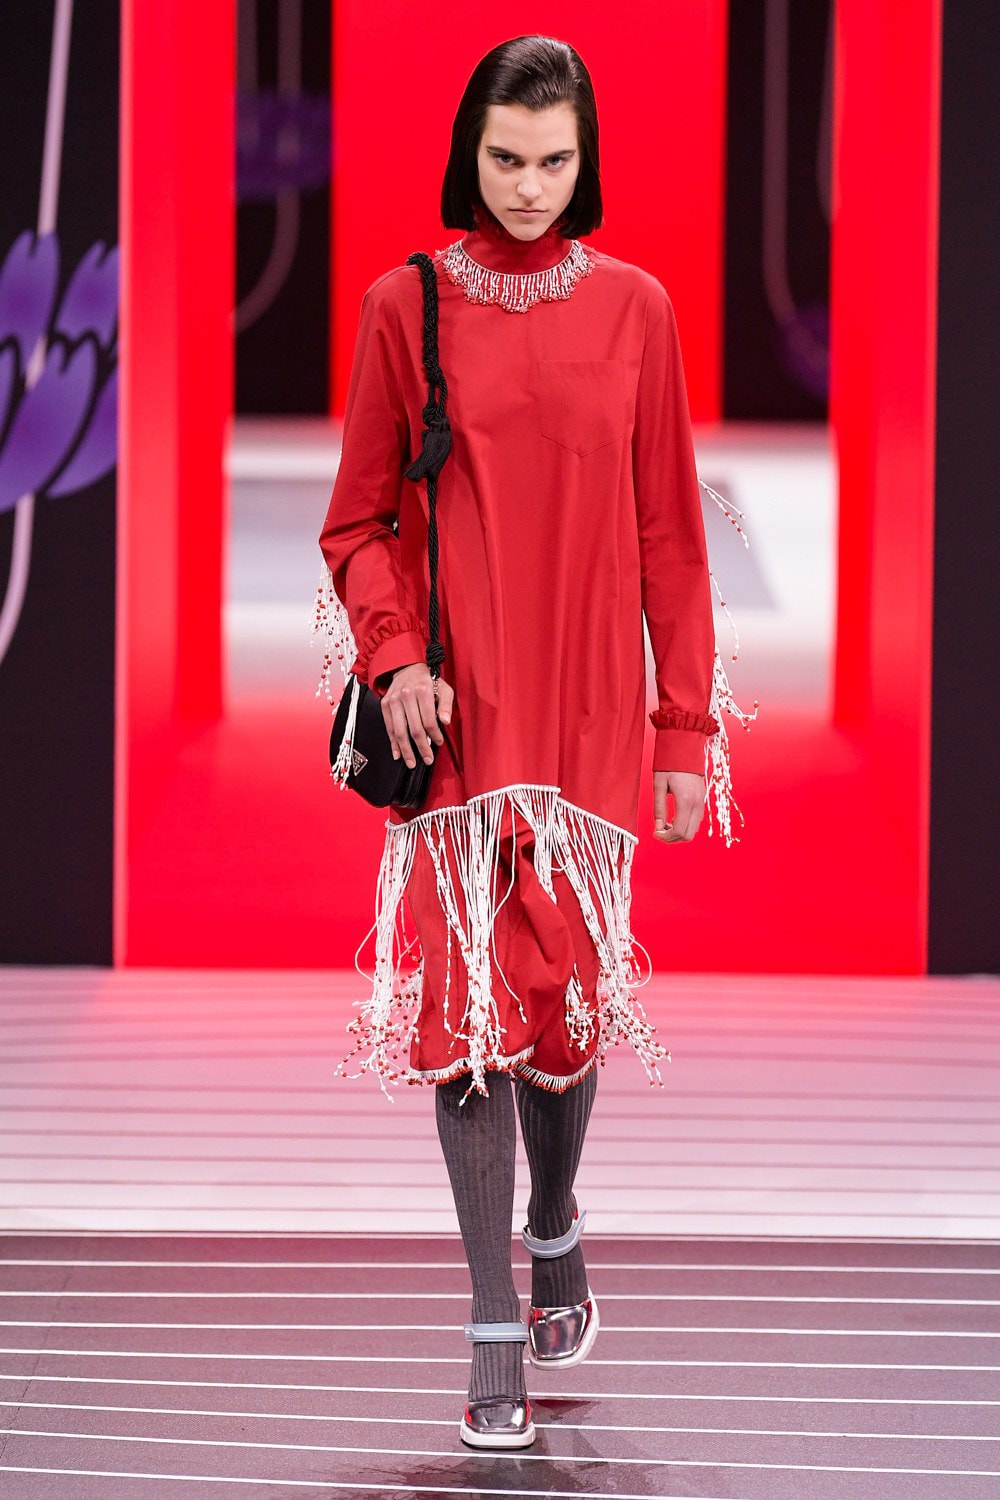 Prada Fall/Winter 2020 Collection Runway Show Fringe Dress Red